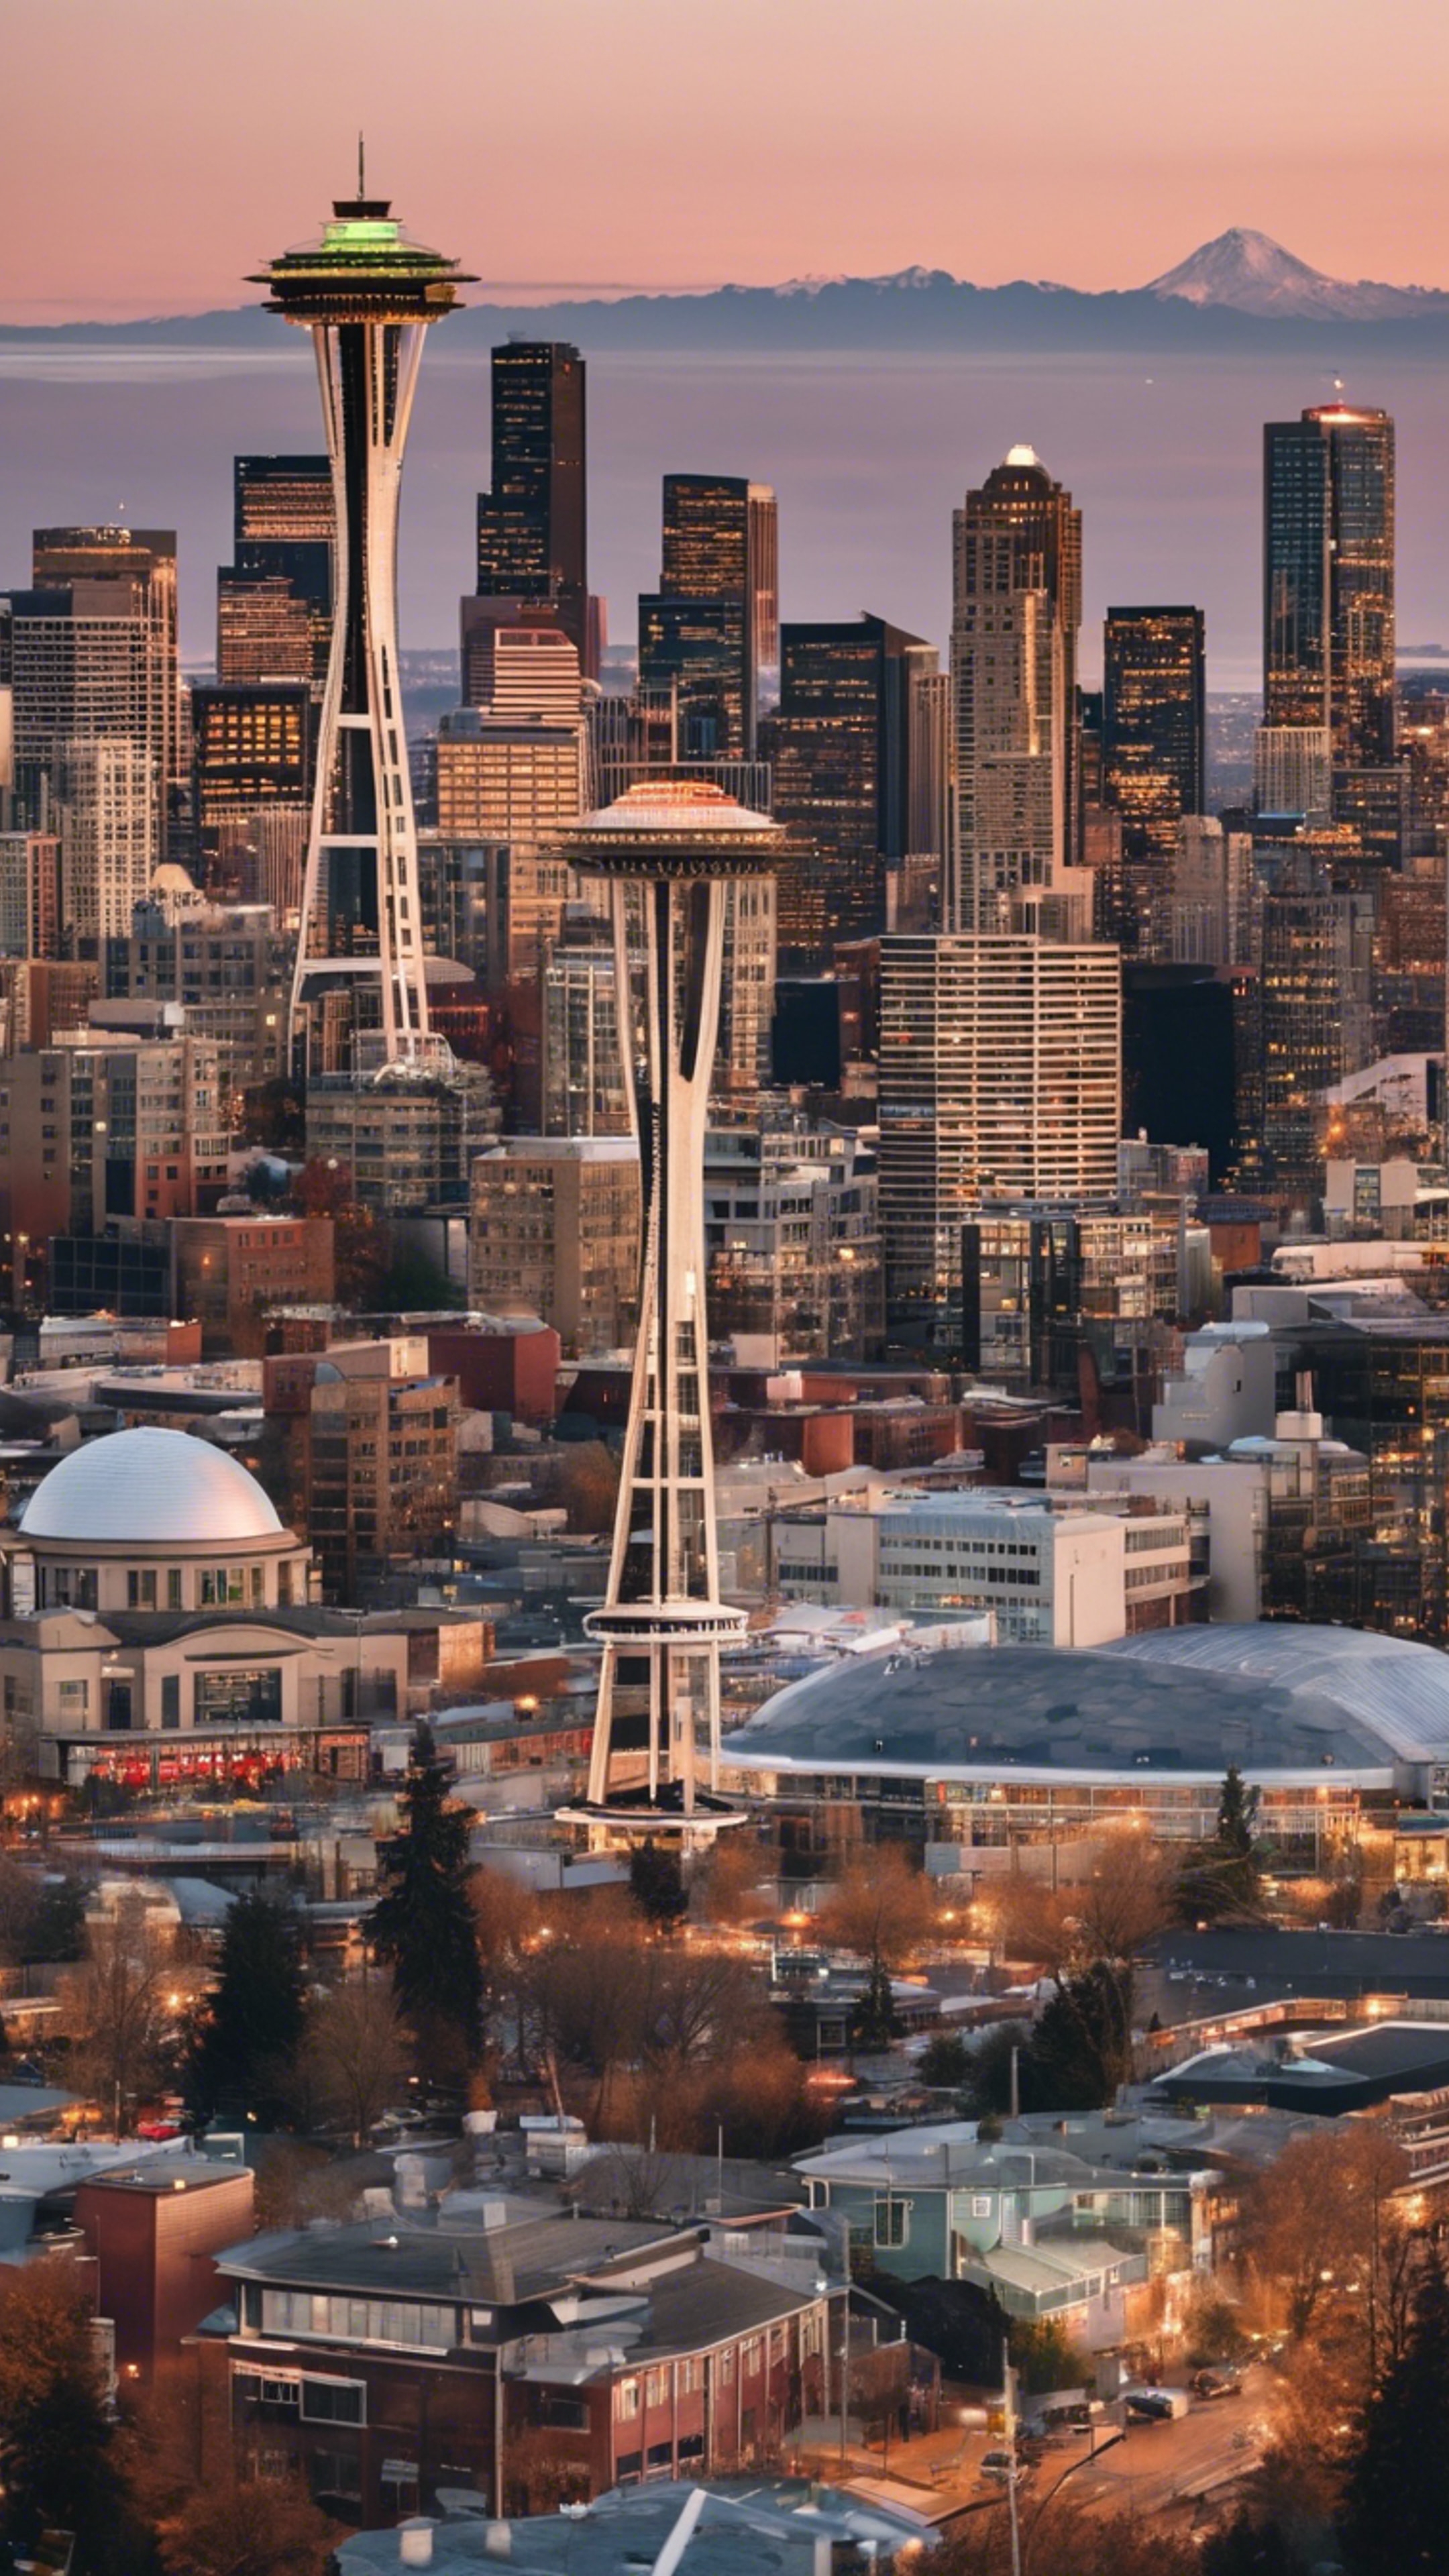 A stunning panorama of the Seattle skyline, accentuated by the unique Space Needle. Wallpaper[ff35fb40bc5141bebb90]